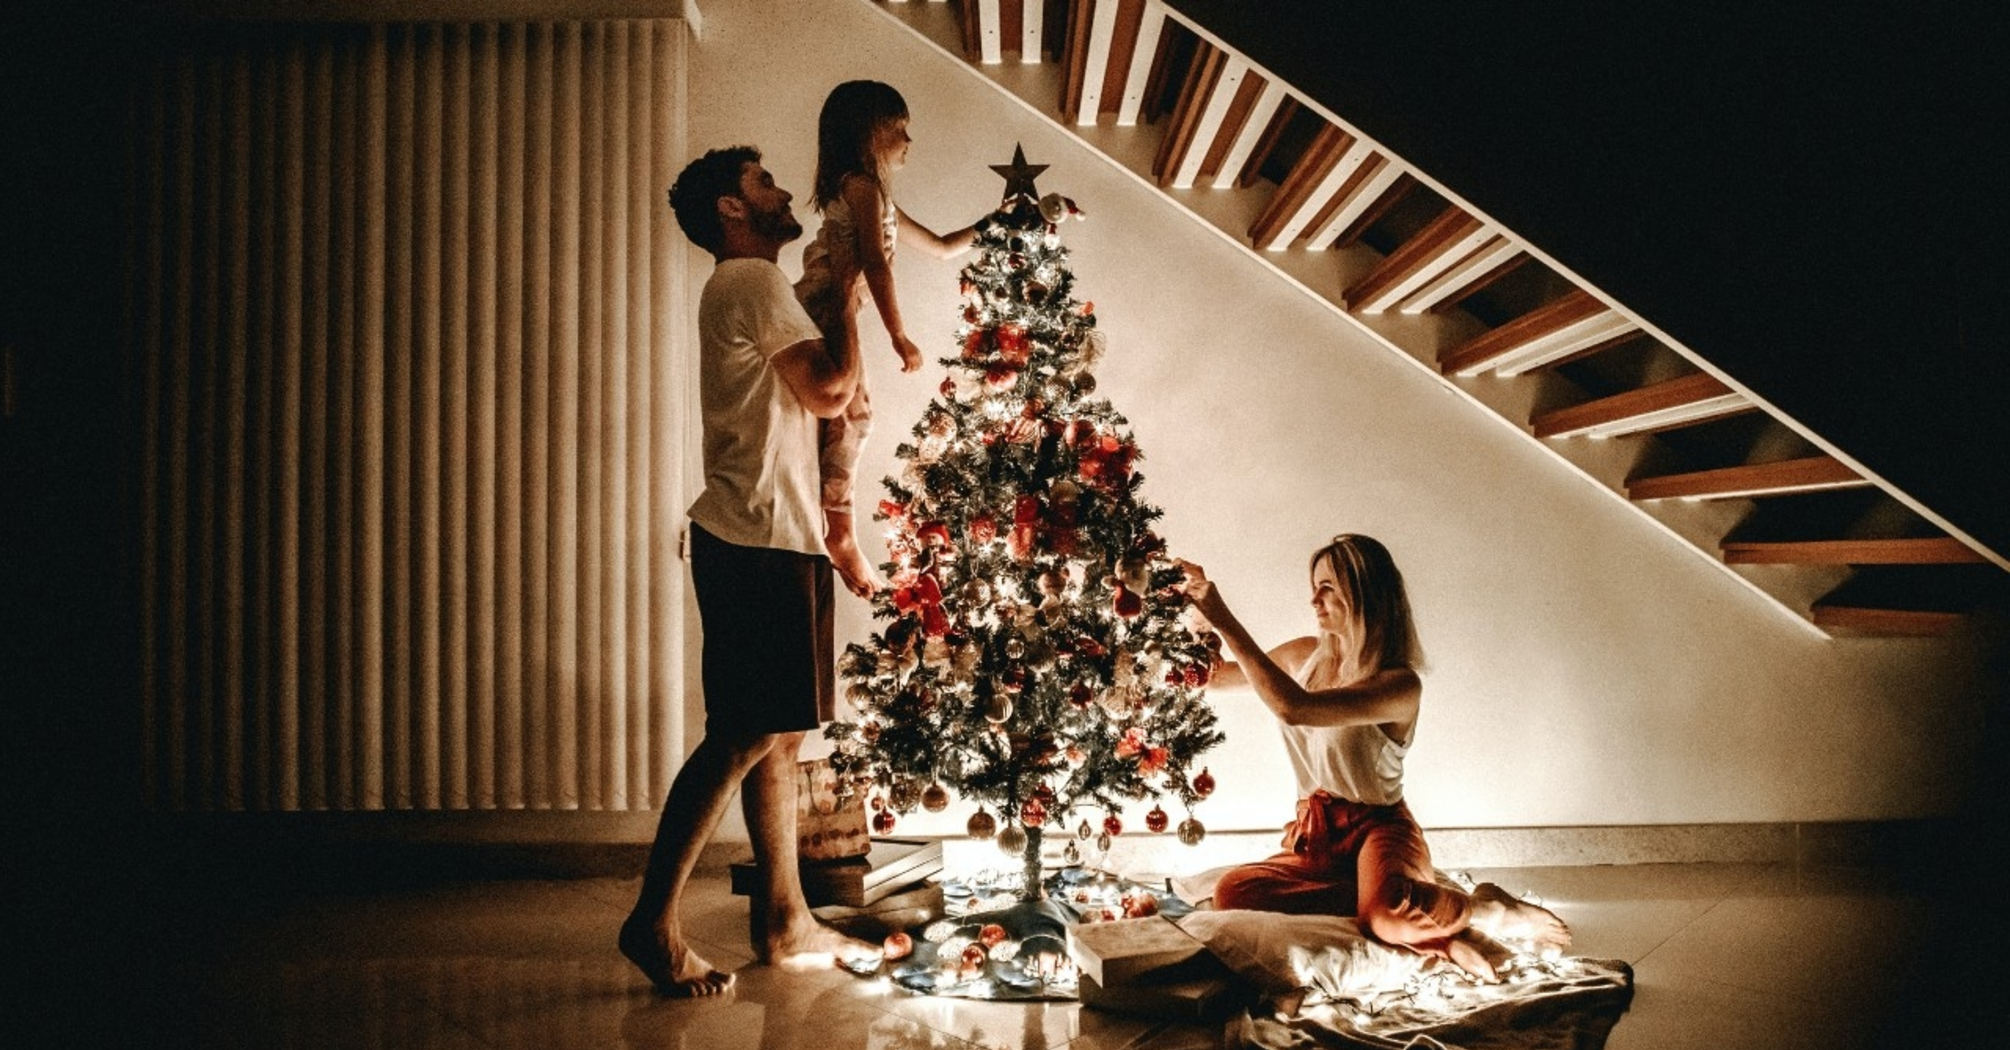 When to put up a Christmas tree to attract good luck